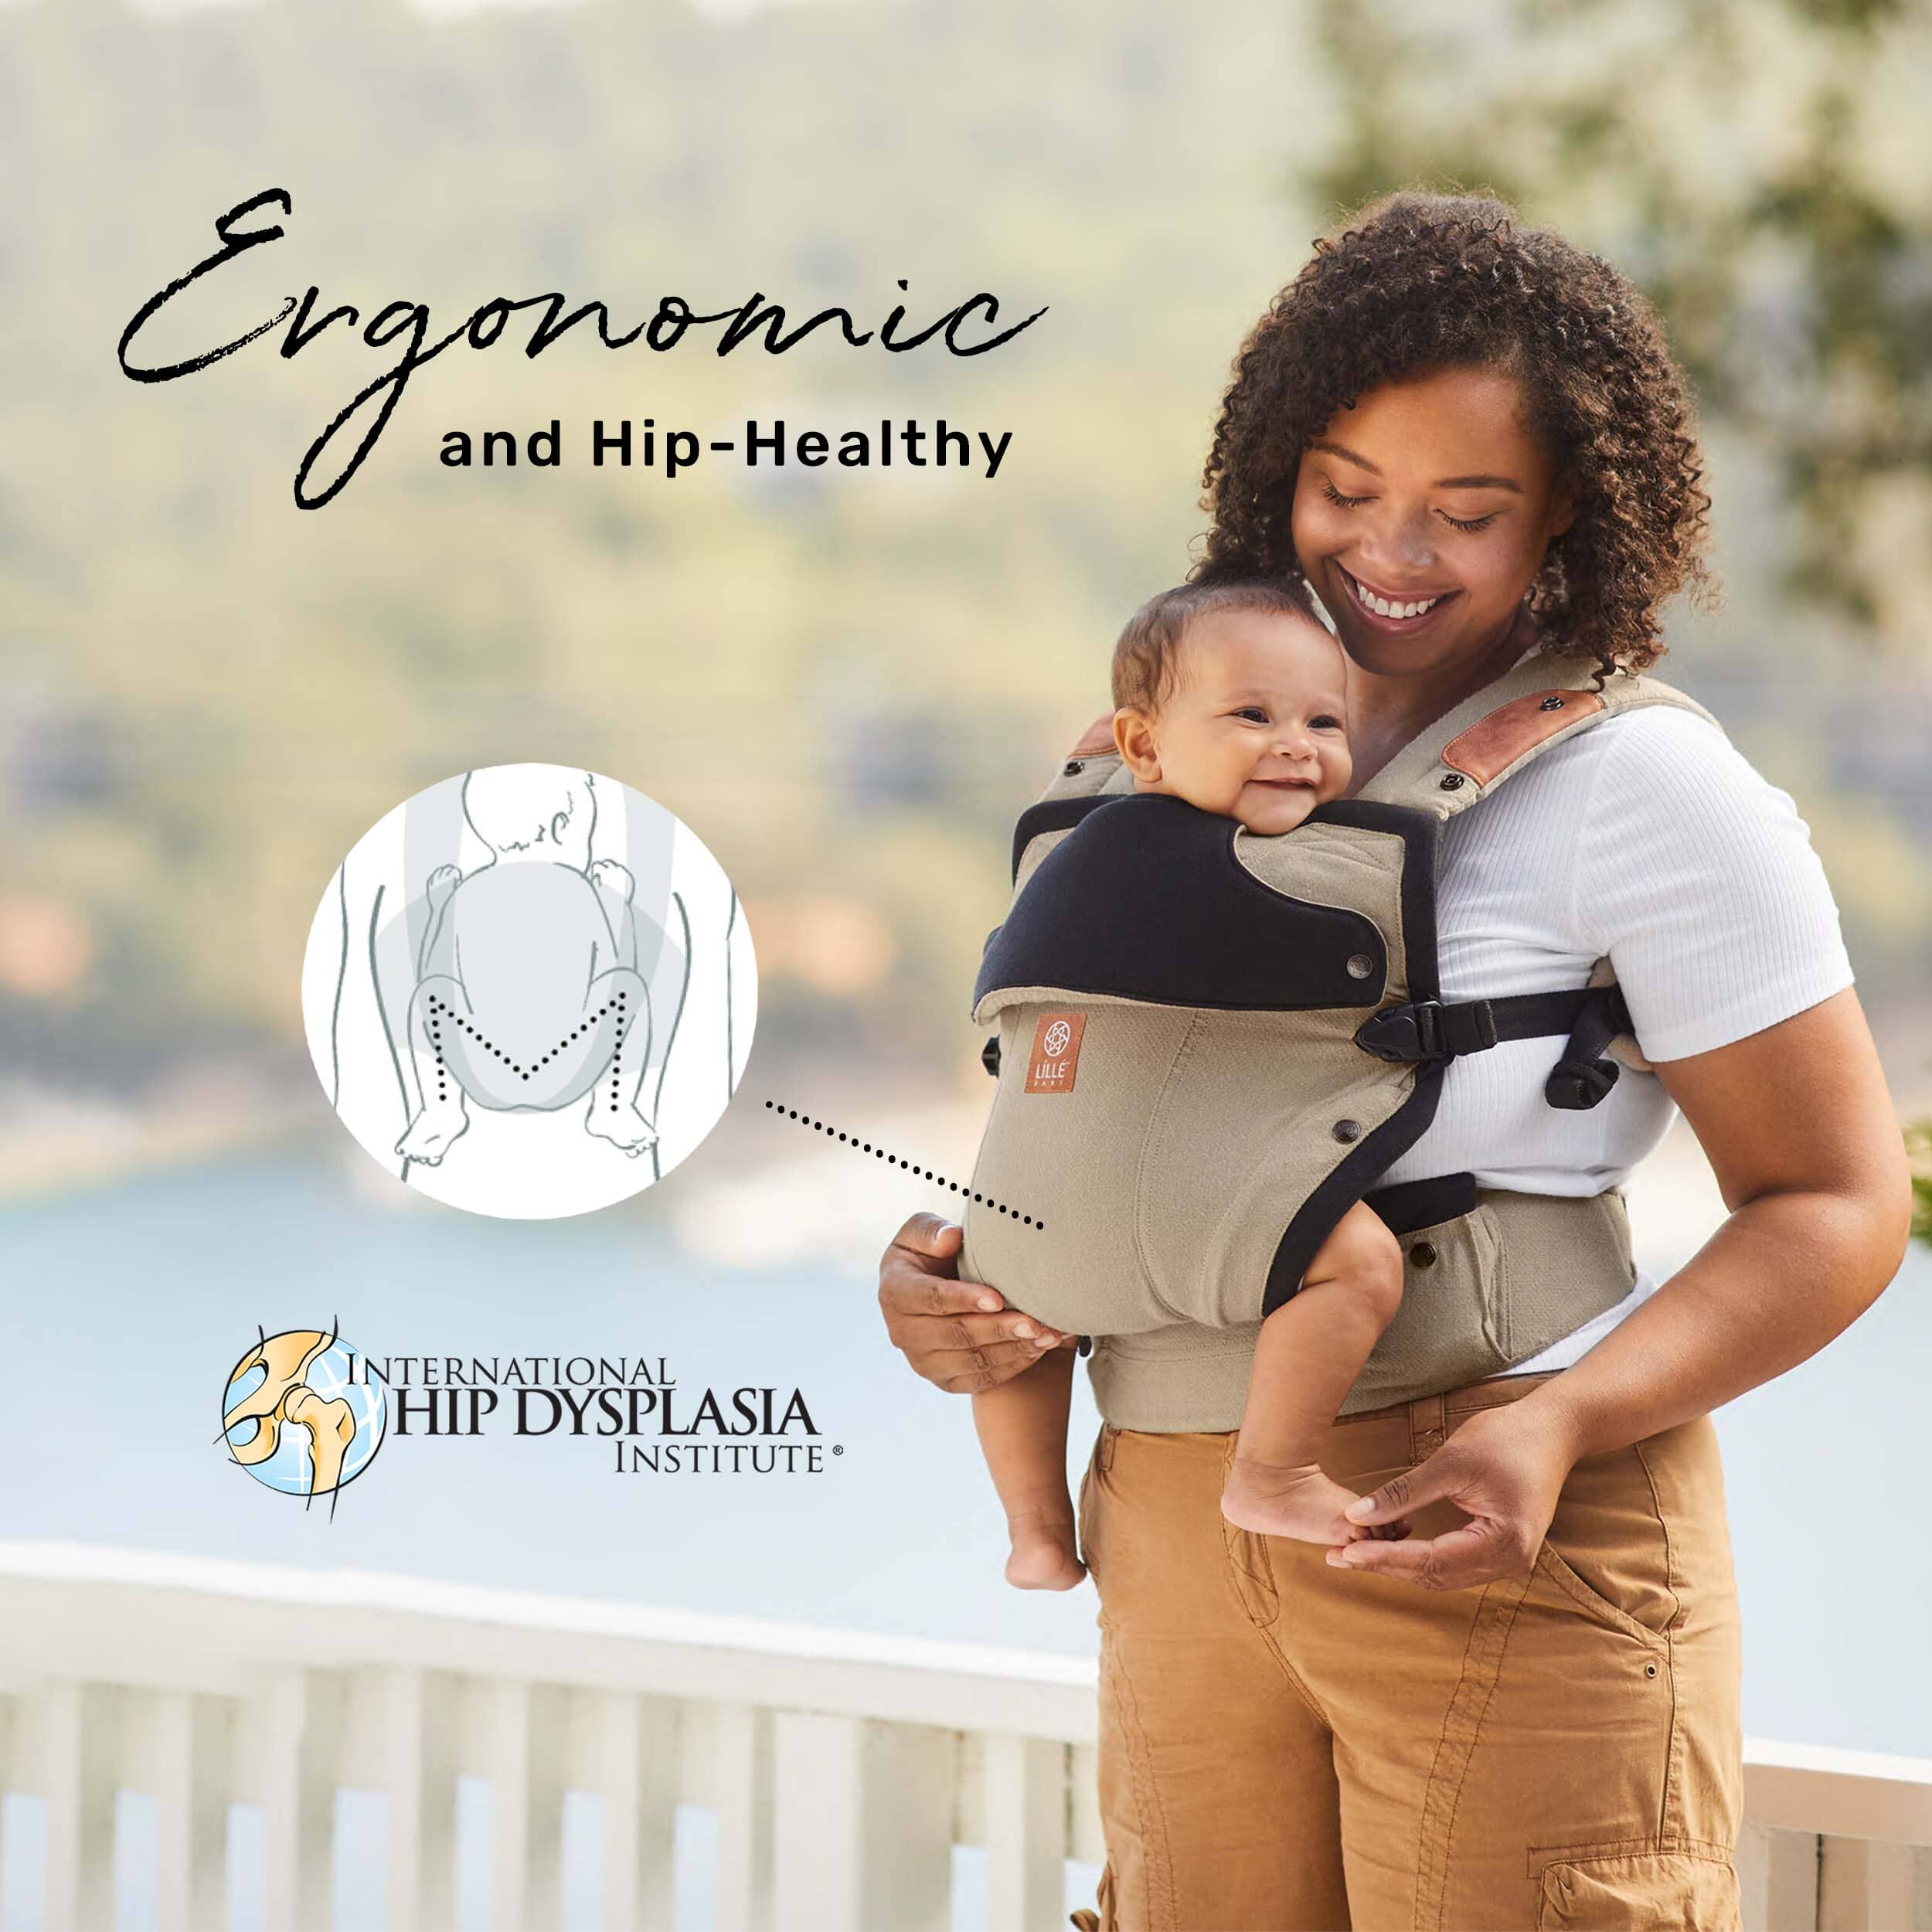 Elevate carrier images shows carrier support for baby. Ergonomic, hip healthy and endorsed by international hip dysplasia institute. 